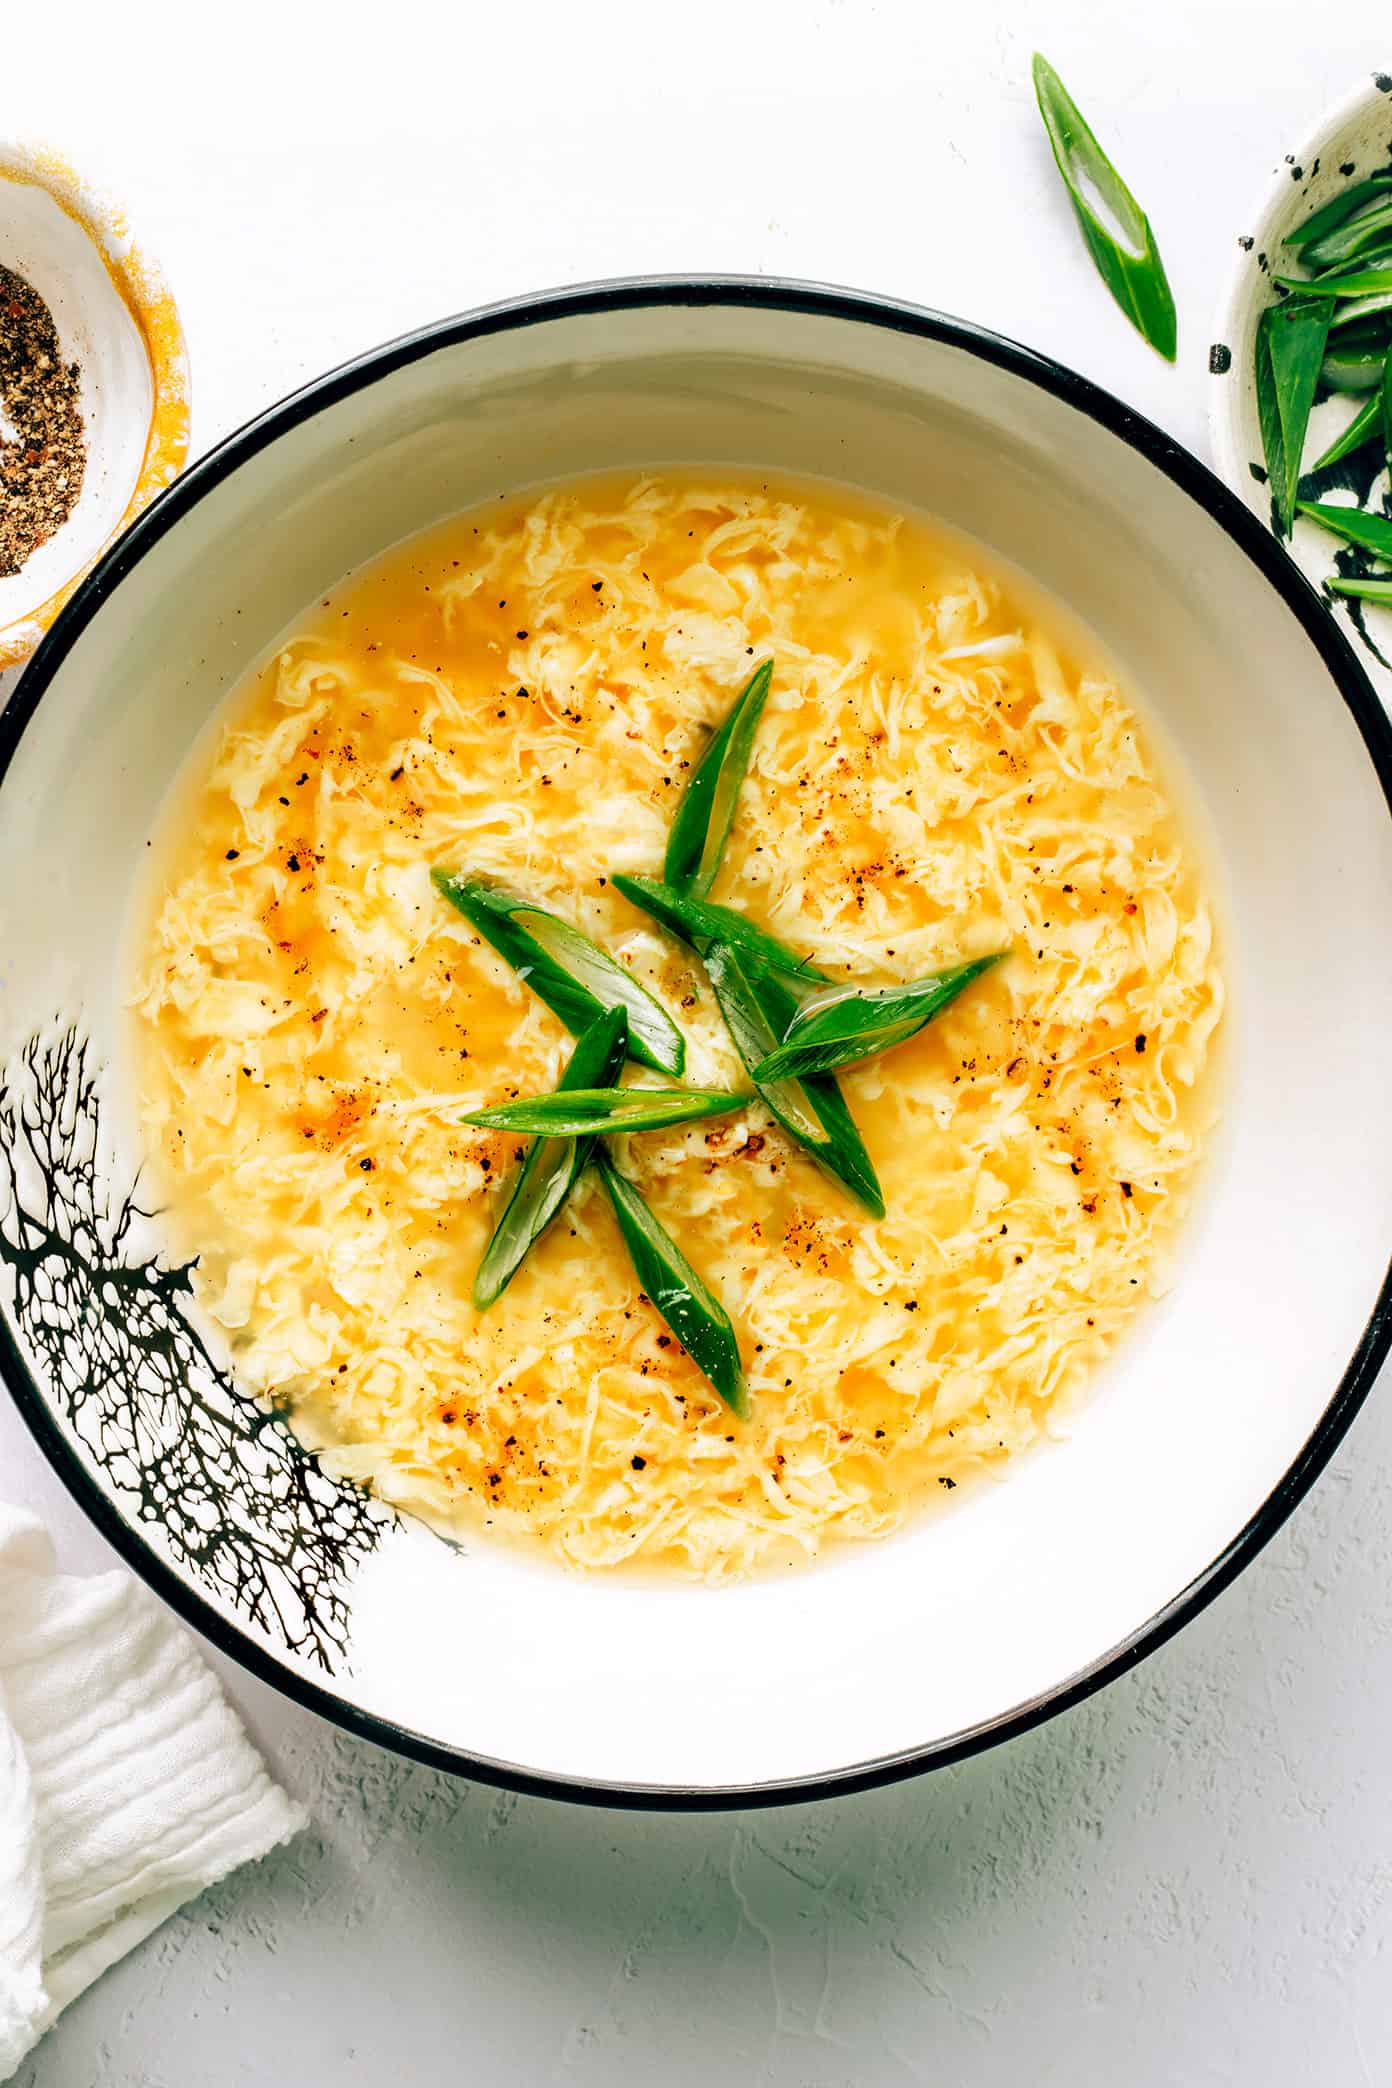 Thick and Savory Egg Drop Soup with Chicken in a Bowl